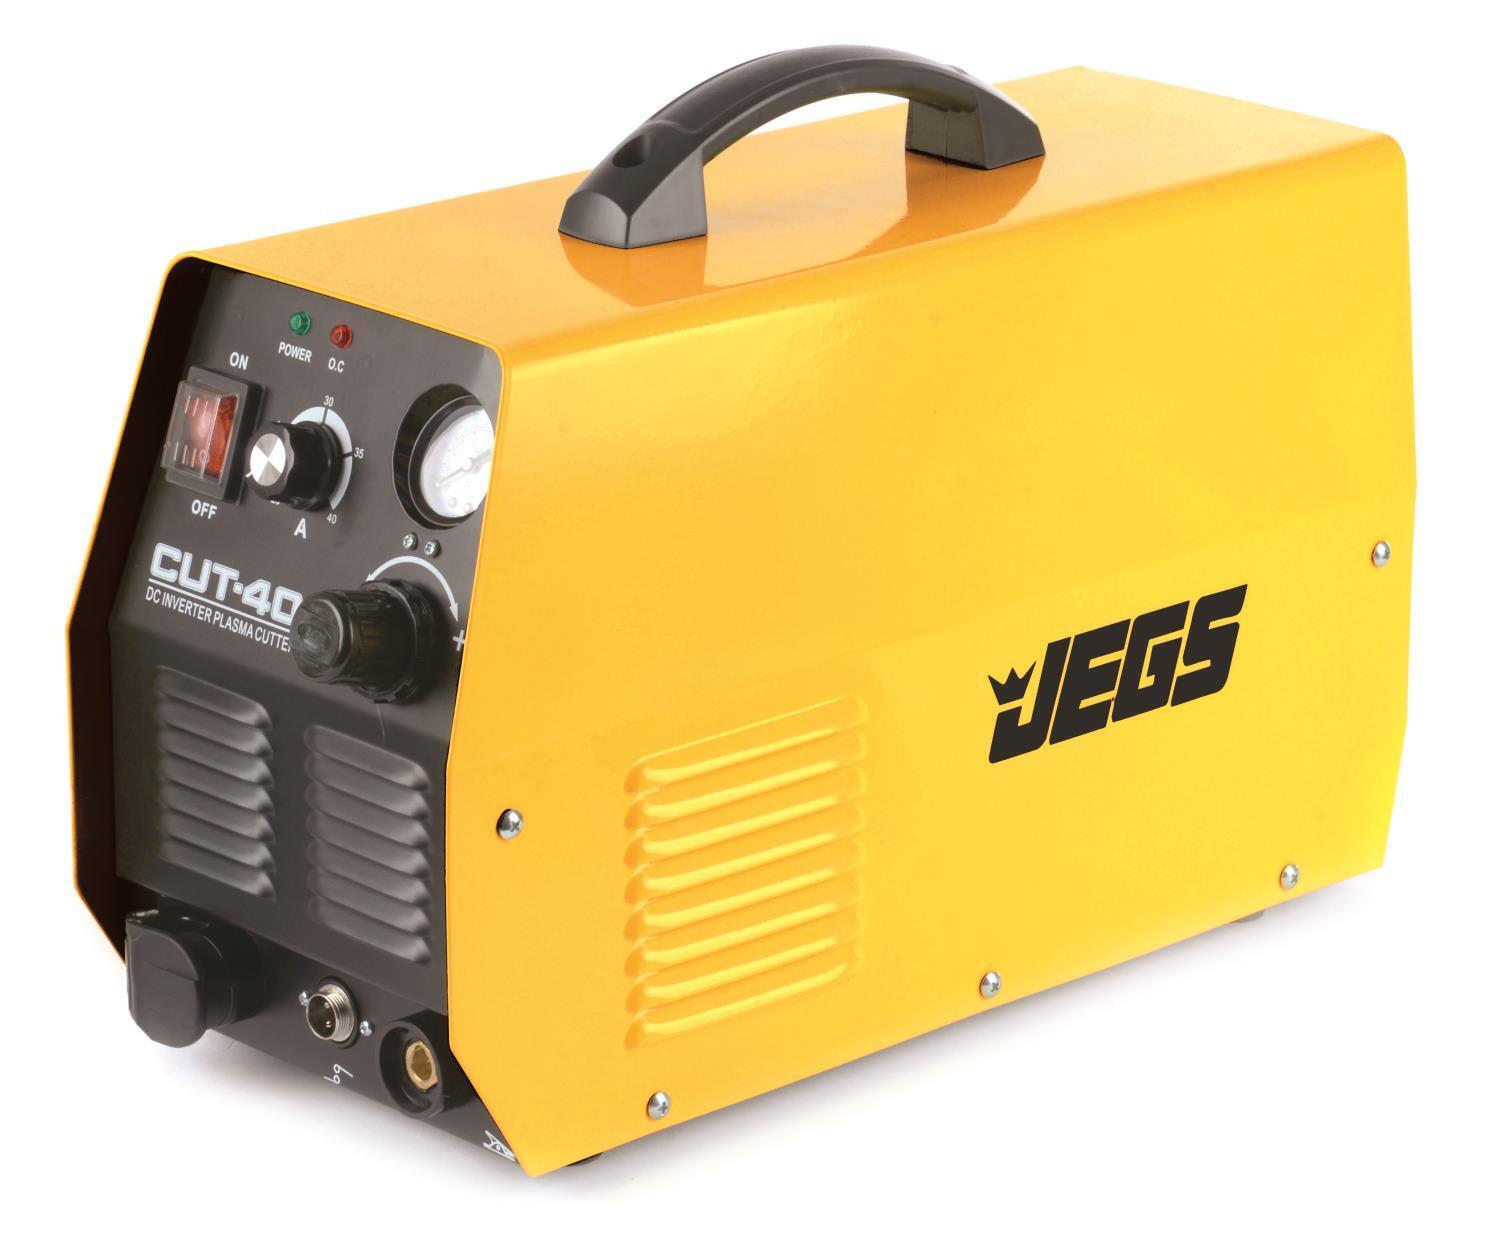 JEGS 81545 Plasma Cutter 20-40 Amp 110/220VAC Cuts Steel/Iron up to 3/8